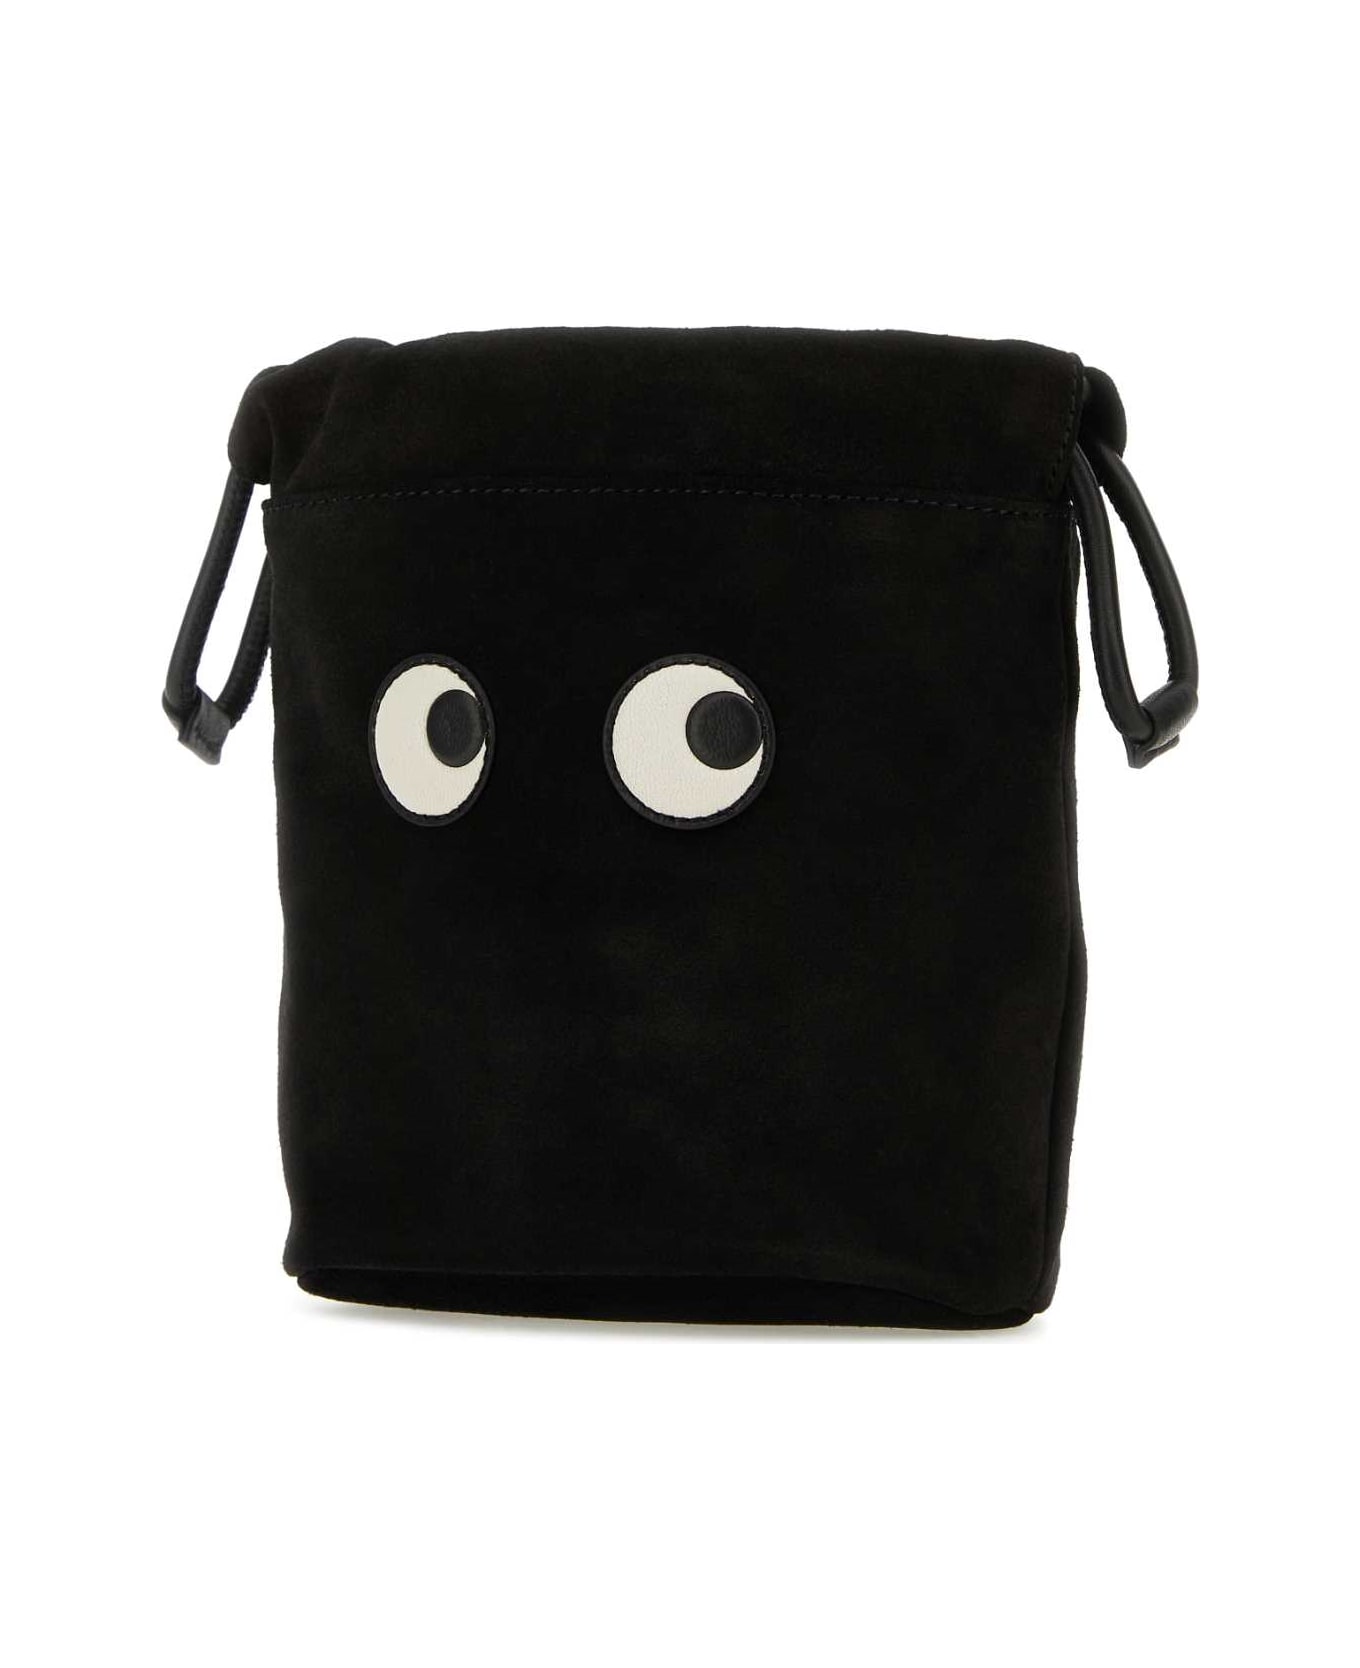 Anya Hindmarch Black Suede Pouch - BLACK